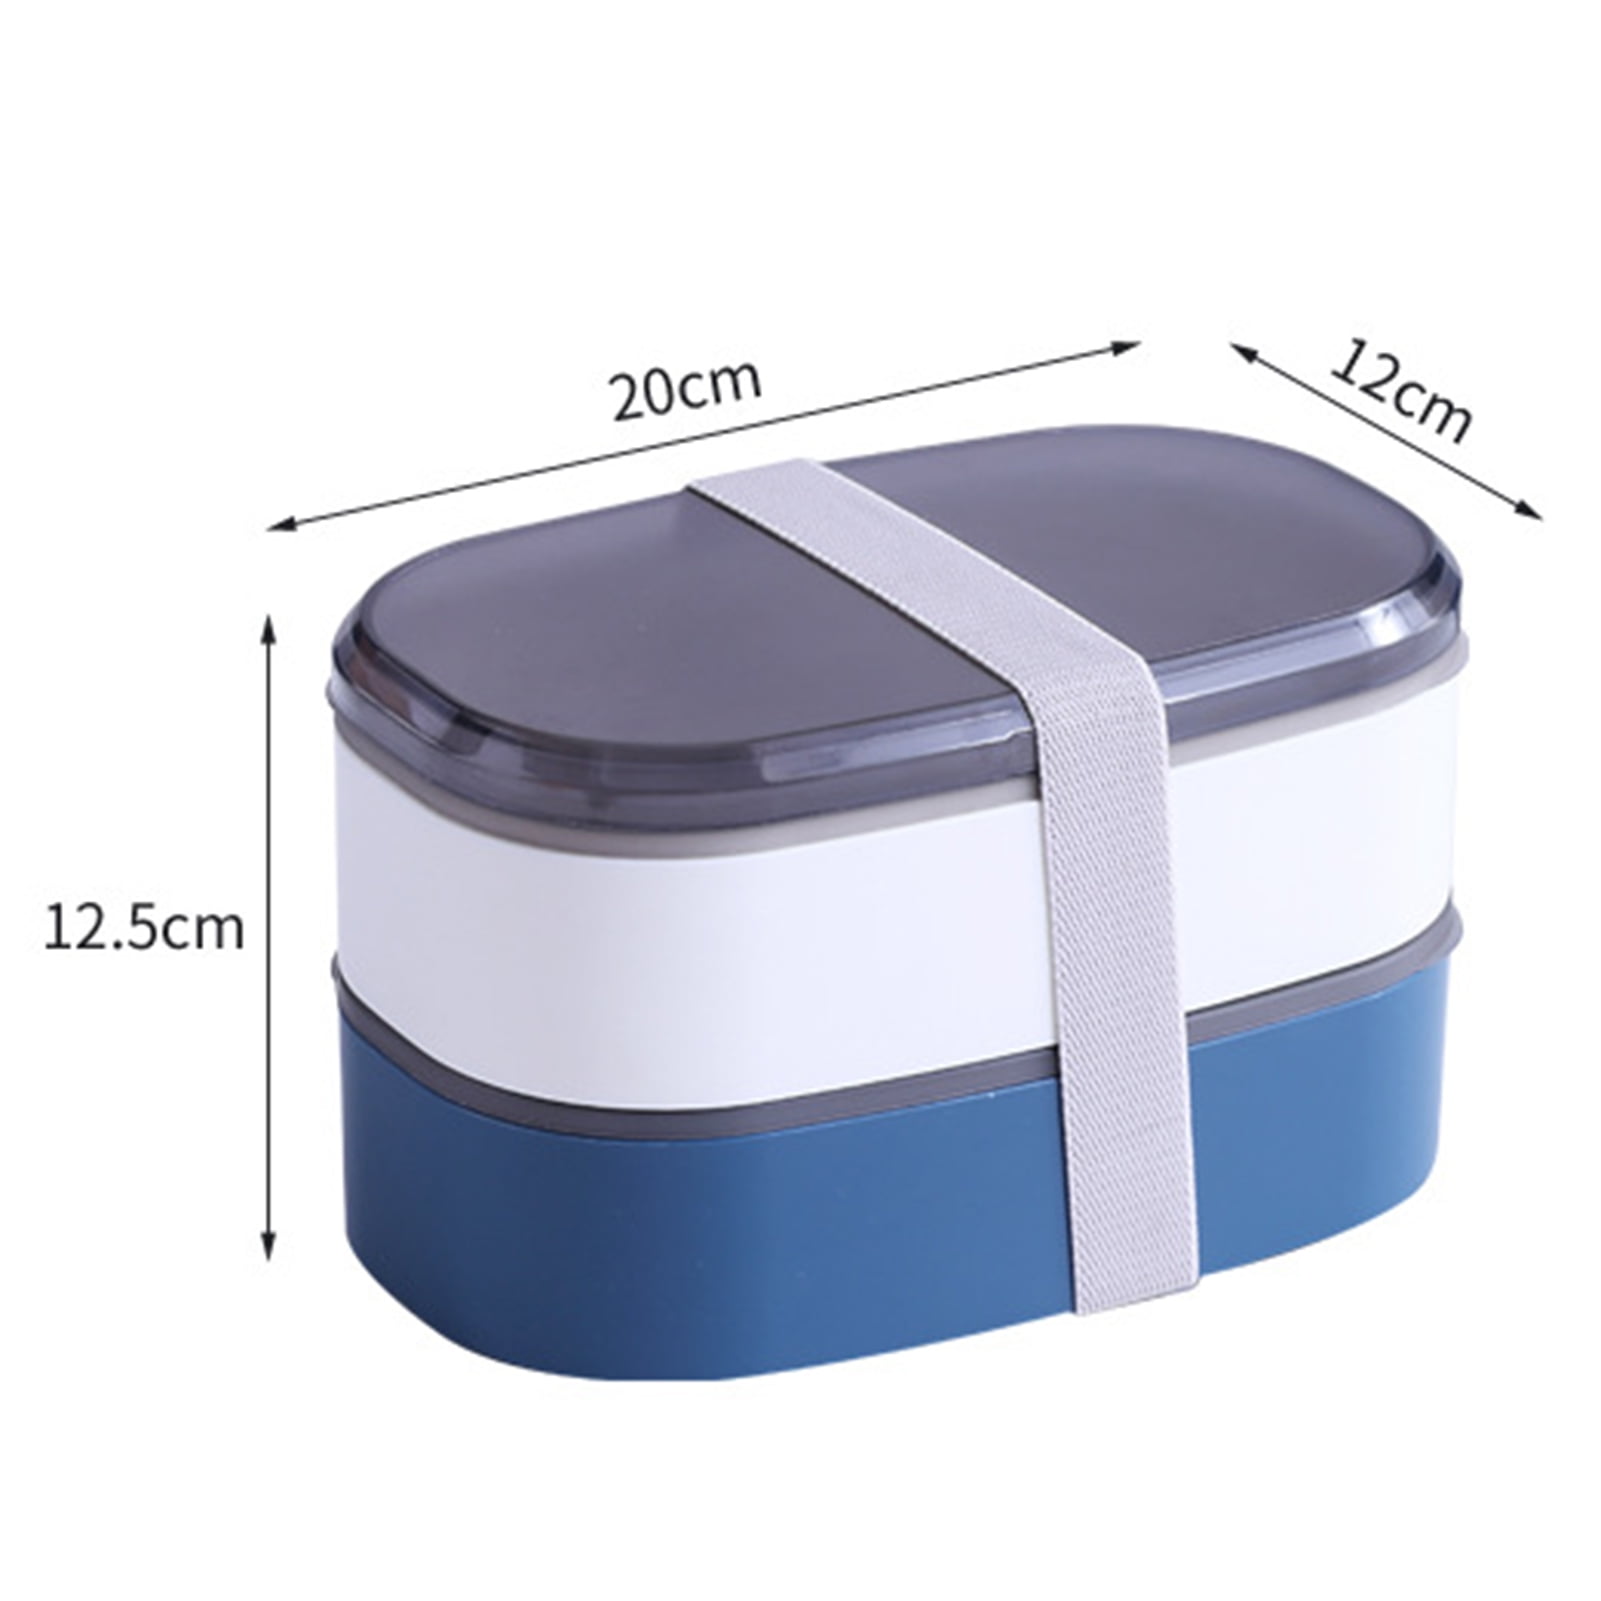 1440ml Japanese Style Bento Box With Microwaveable Feature, Lunch Container  Set With Bag And Sauce Holder Utensil, Suitable For Kids And Adults